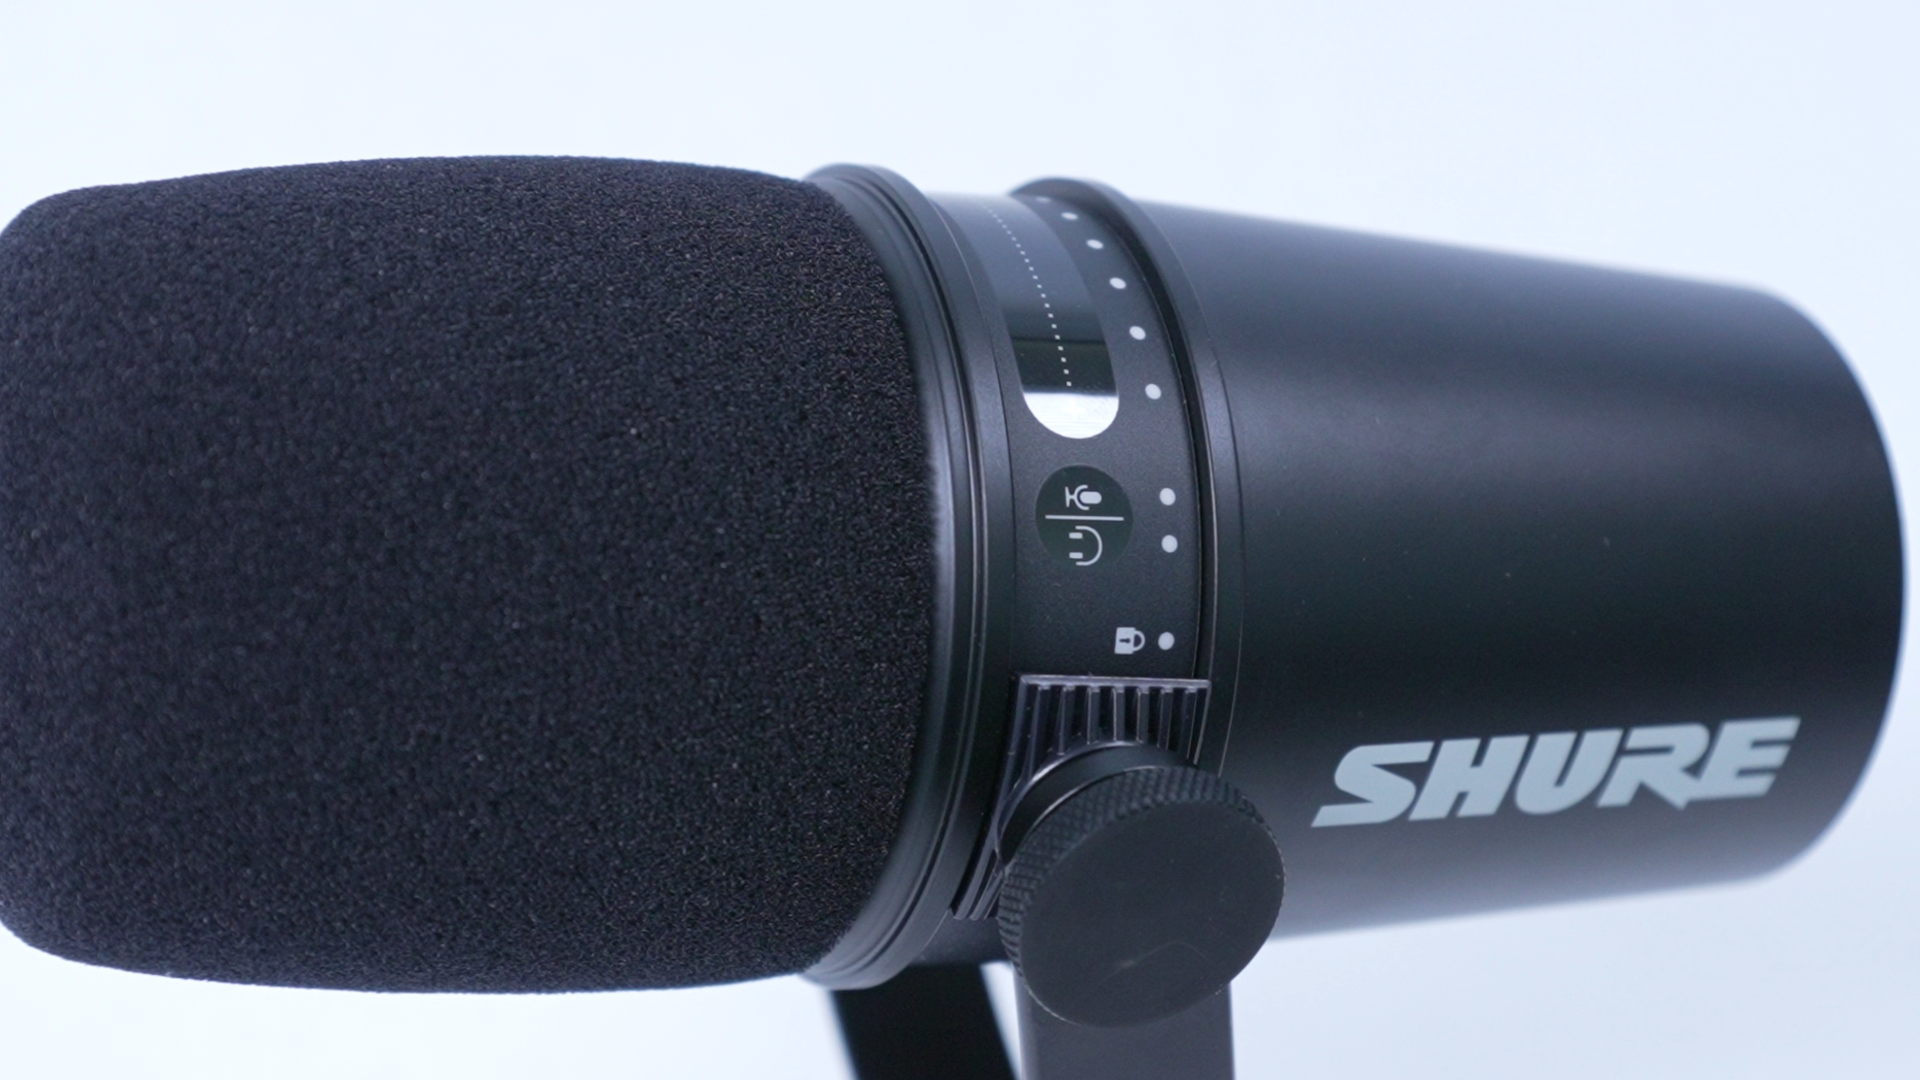 The Shure MV7 Will Be The New Go To Microphone for Podcasters., by Justin  Phillips